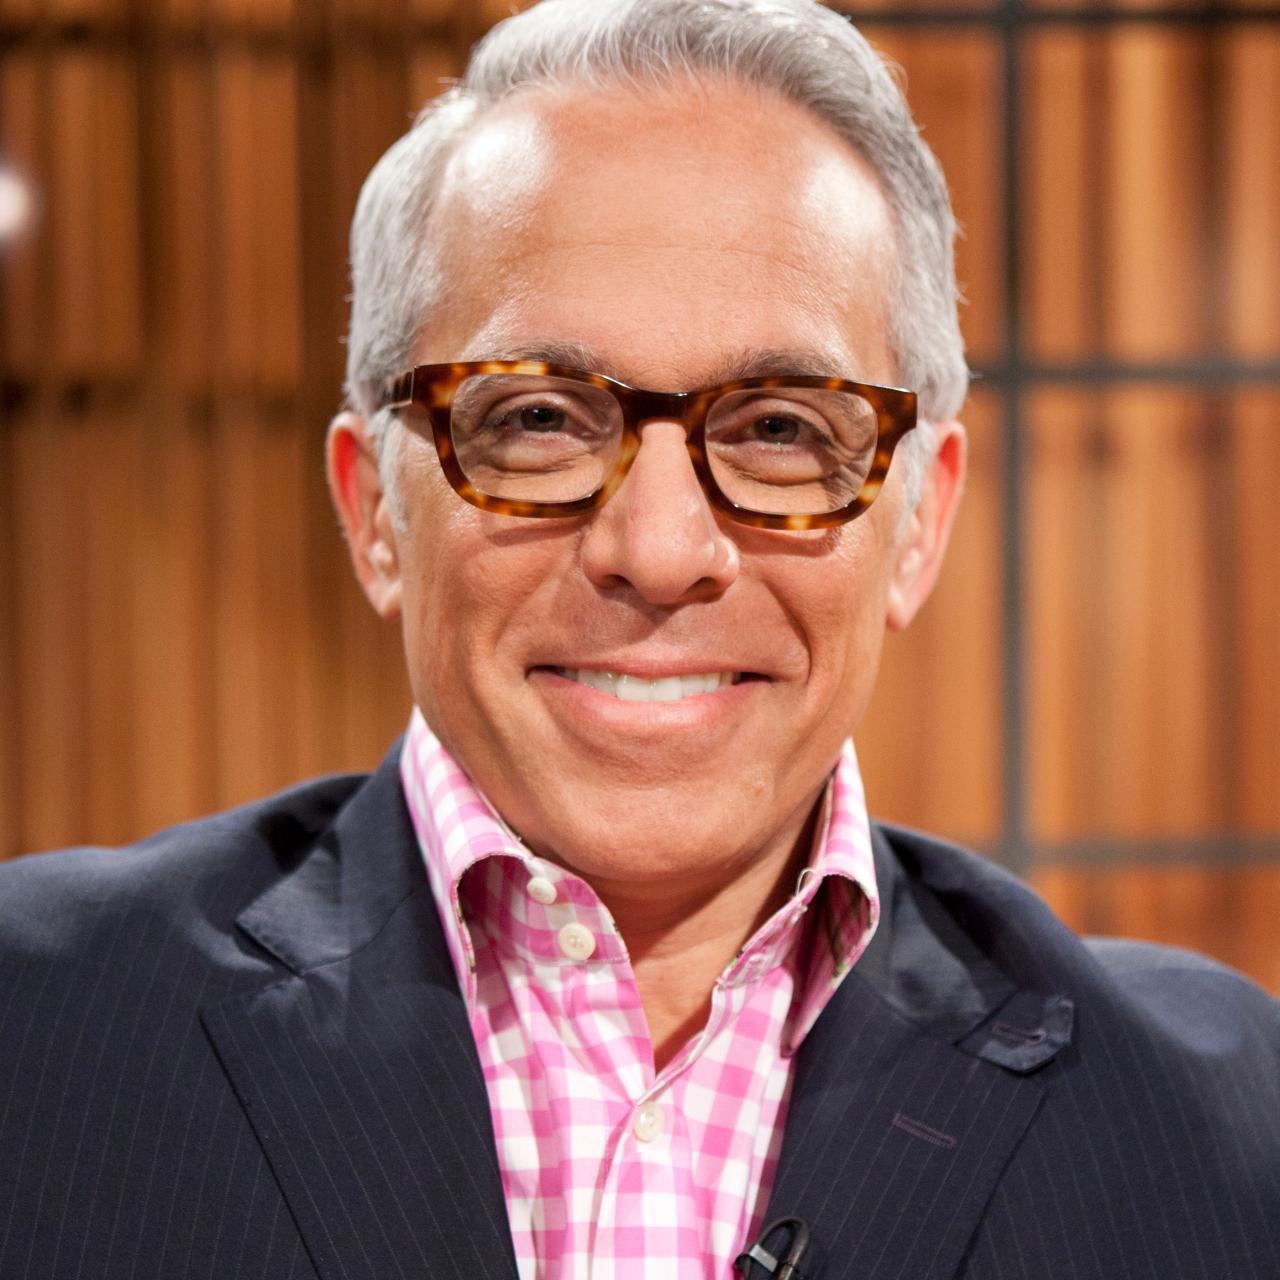 A Chat with Chef and Food Network Personality Geoffrey Zakarian